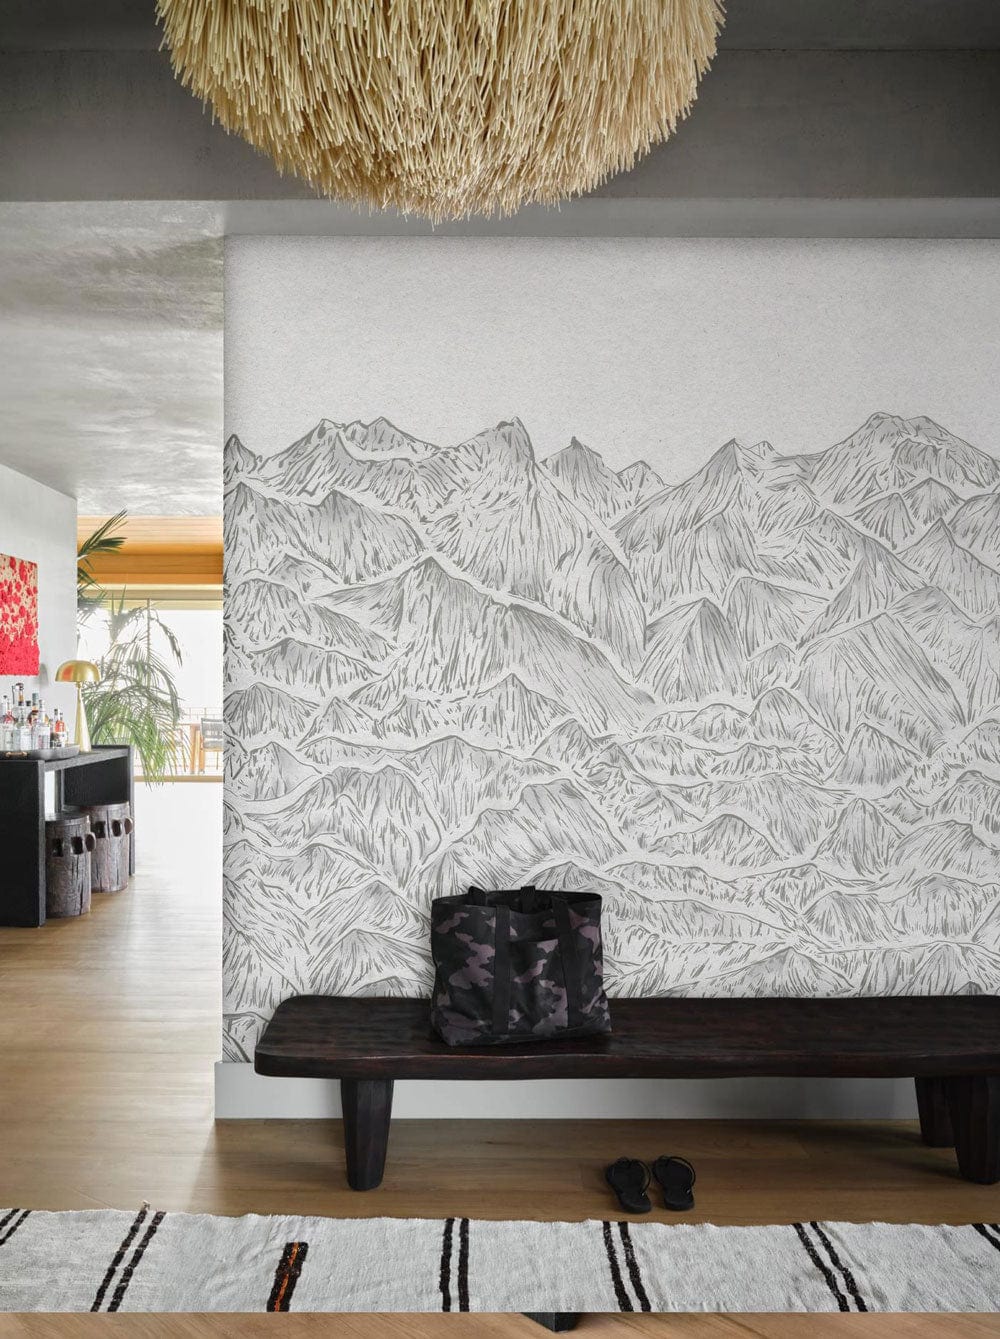 wallpaper depicting the peaks of the mountains in a pencil sketch for the hallway